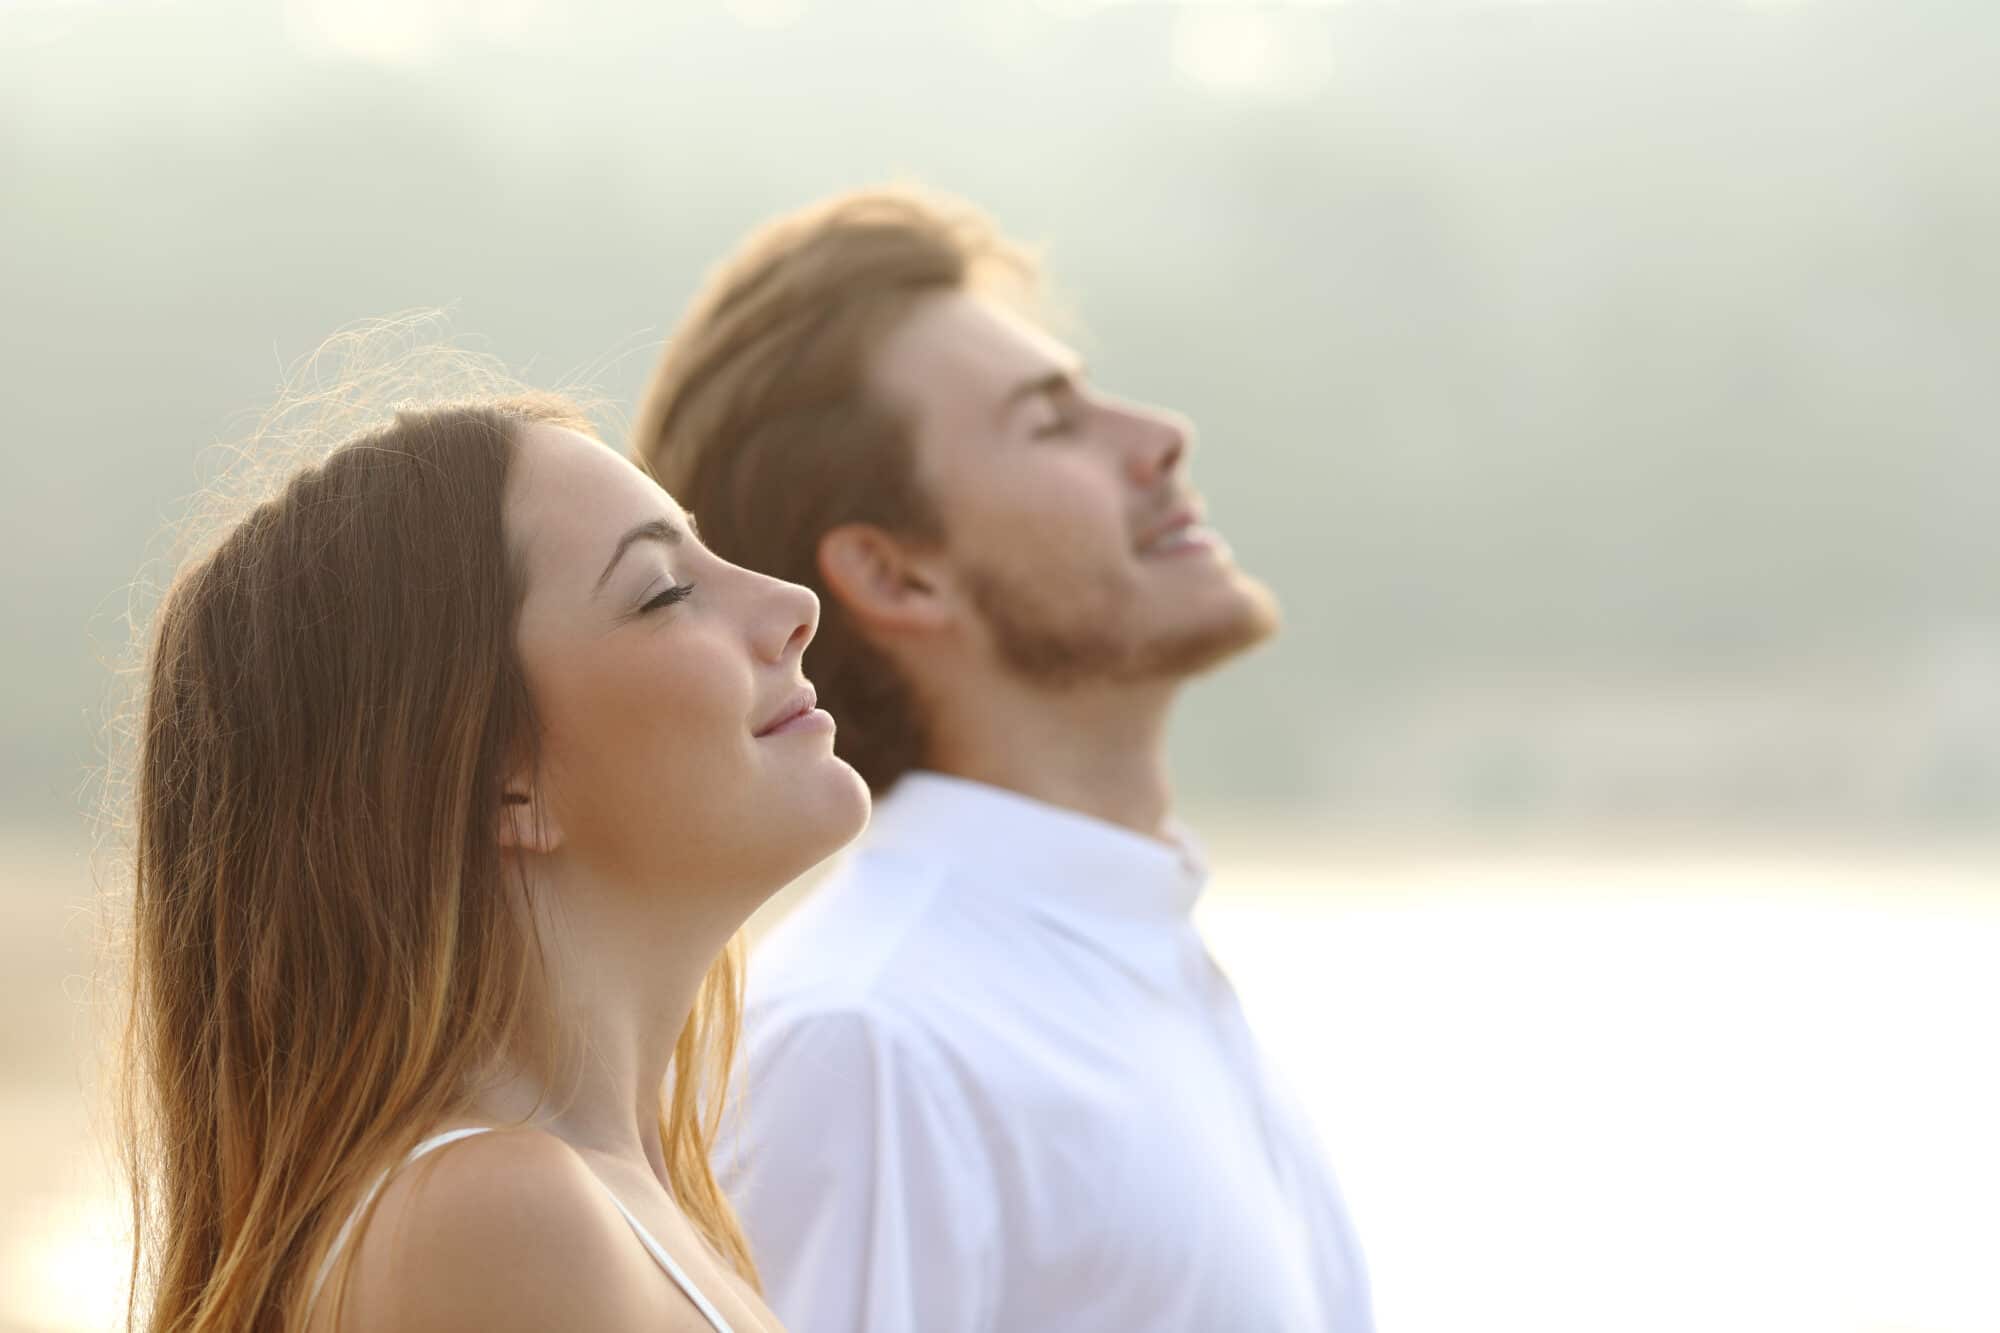 Profile of a couple of man and woman breathing deep fresh air together at sunset